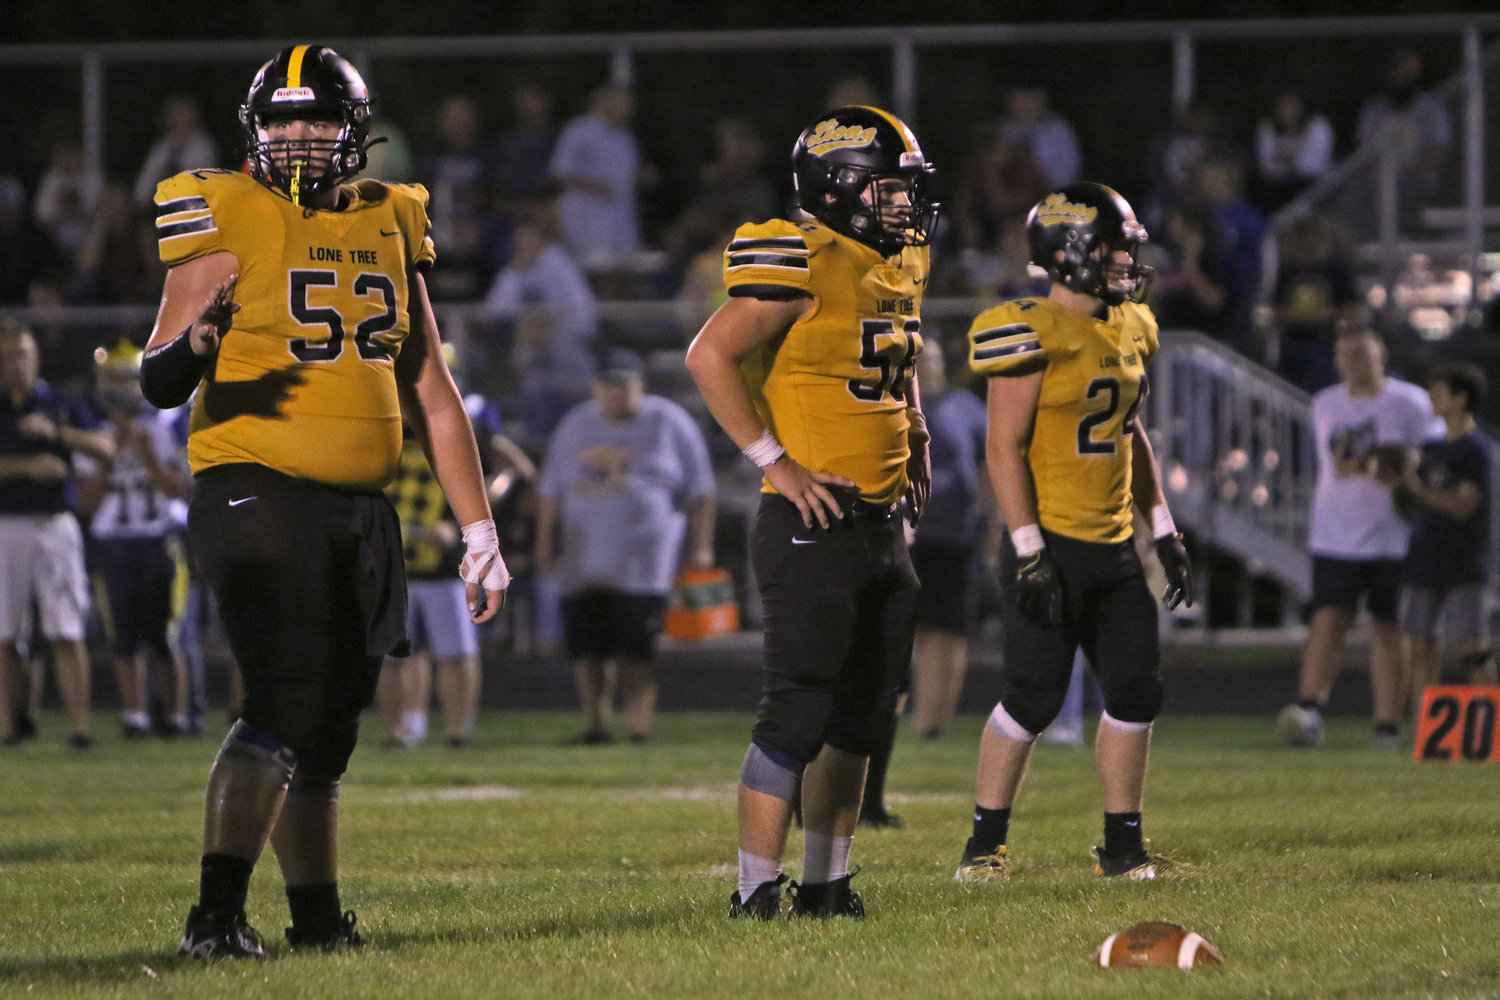 The Lone Tree defensive line of Mitch Koedam, Andrew Hotz, and Joe Boxwell waits for the next snap.